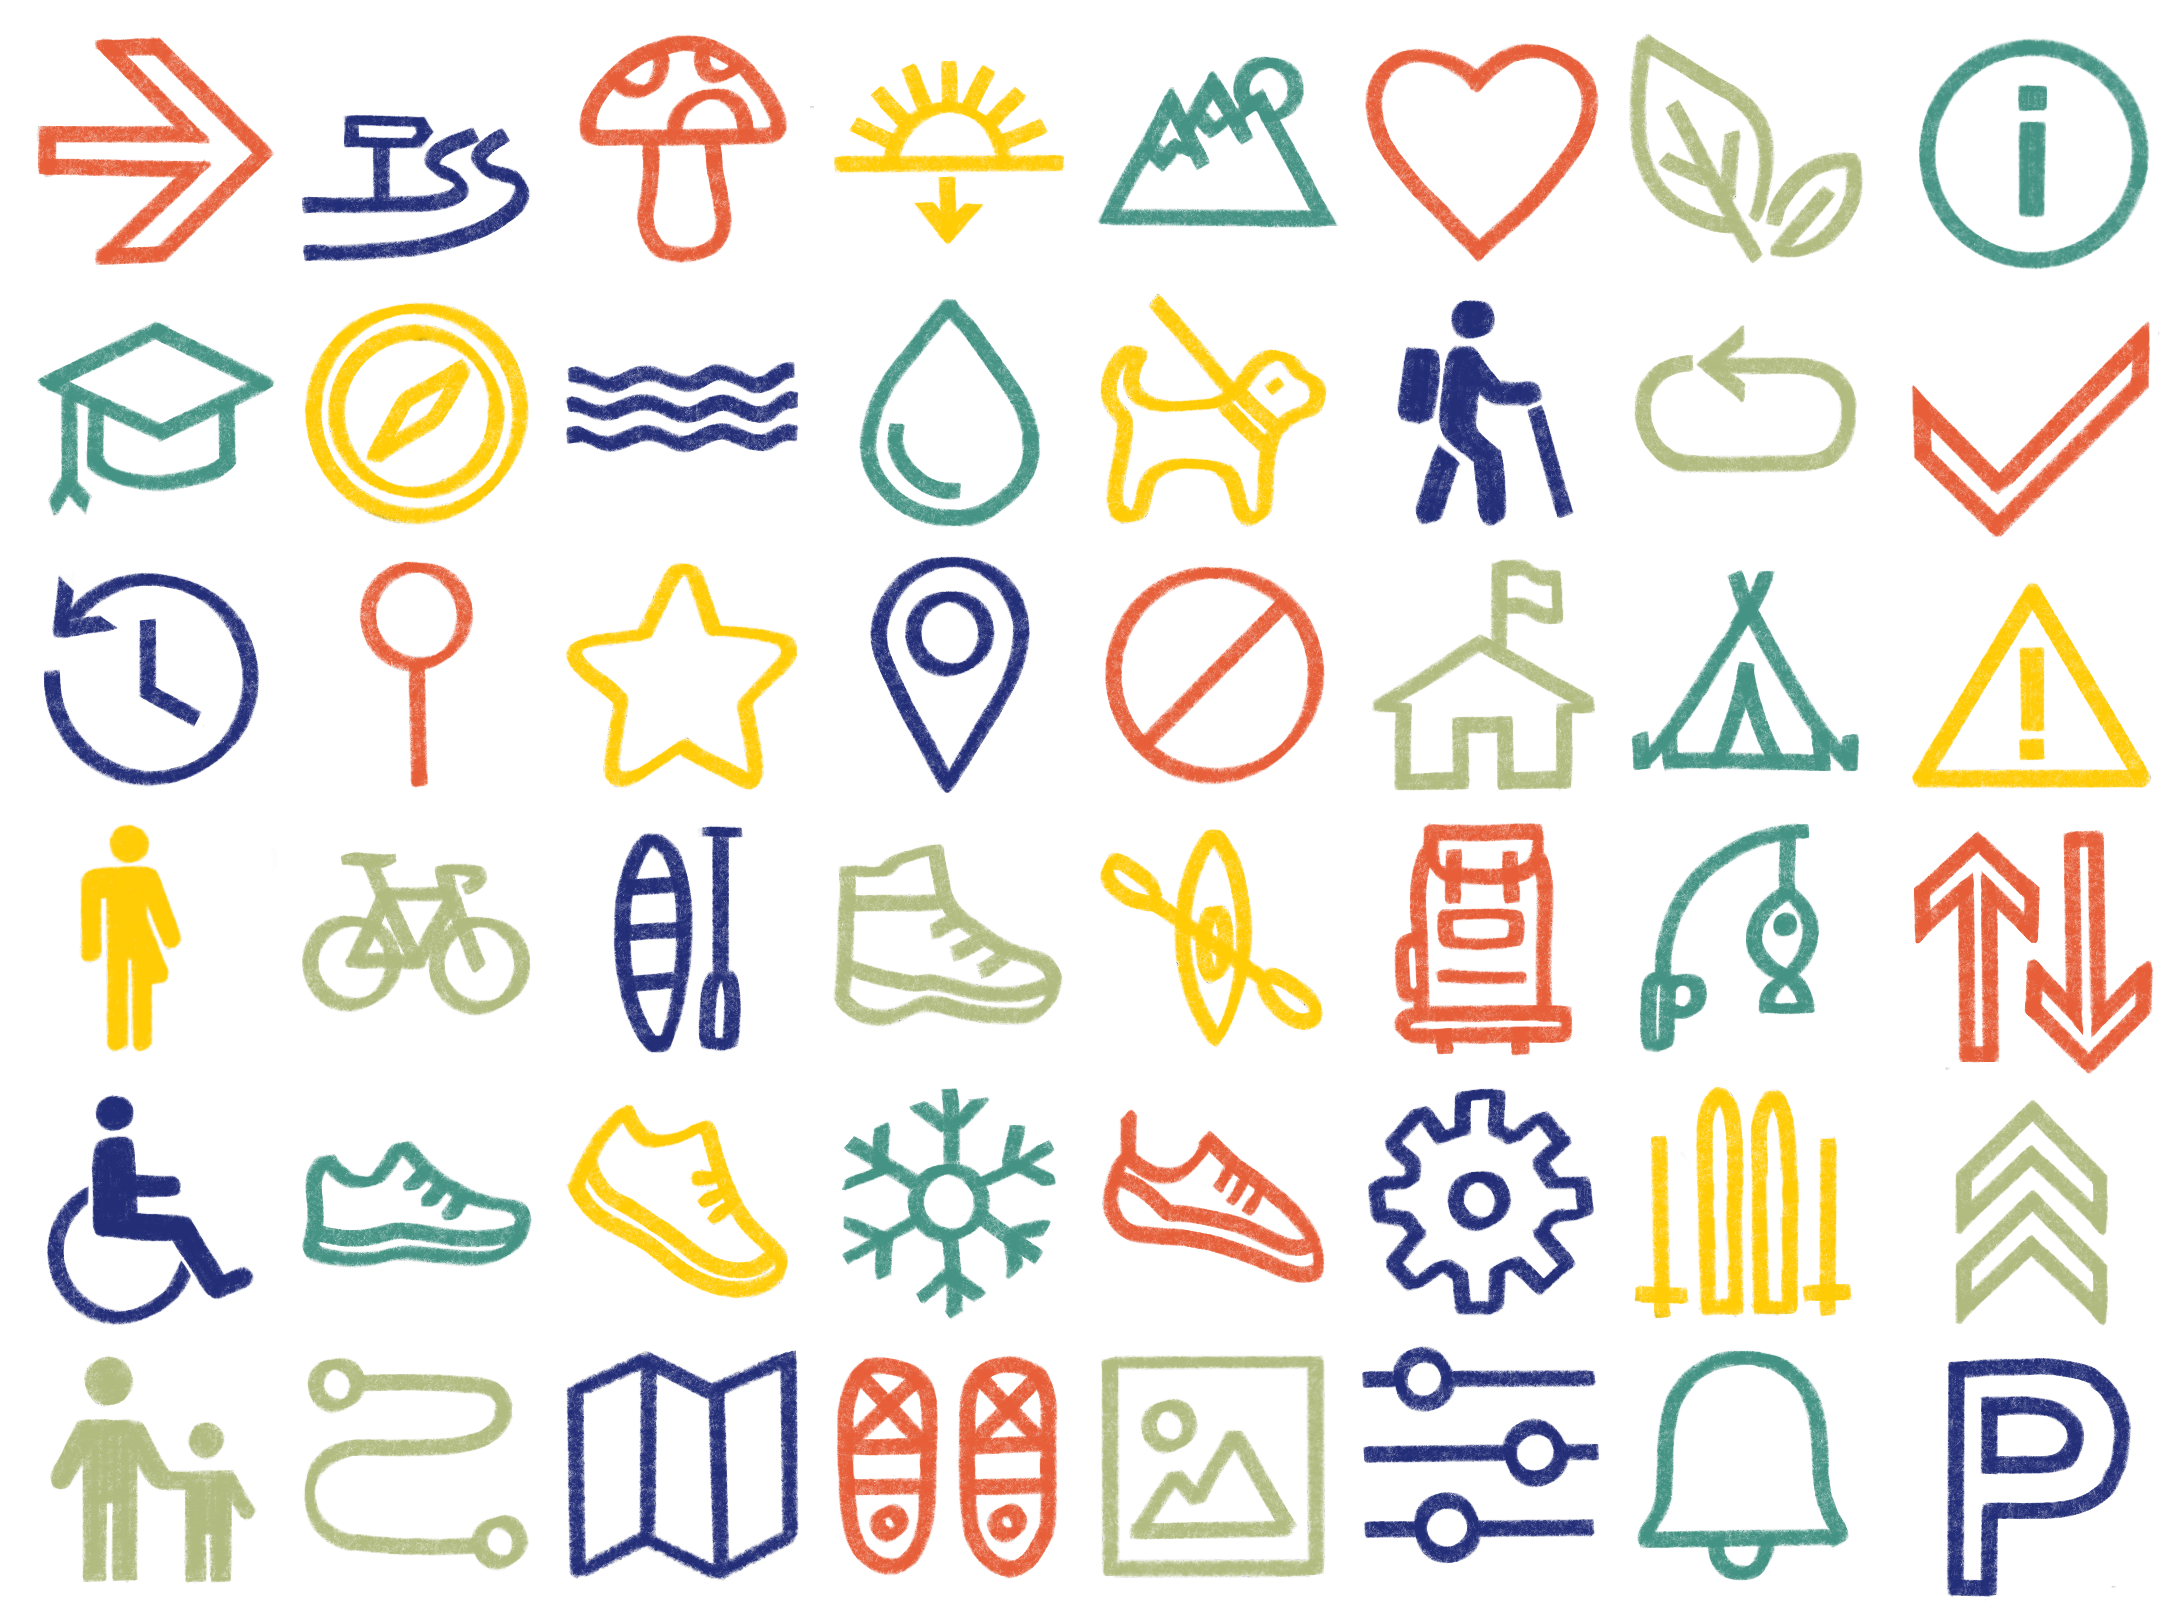 set of 48 icons representing a variety of outdoor activities or amenities, plus some basic ui and systems icons, multicolored